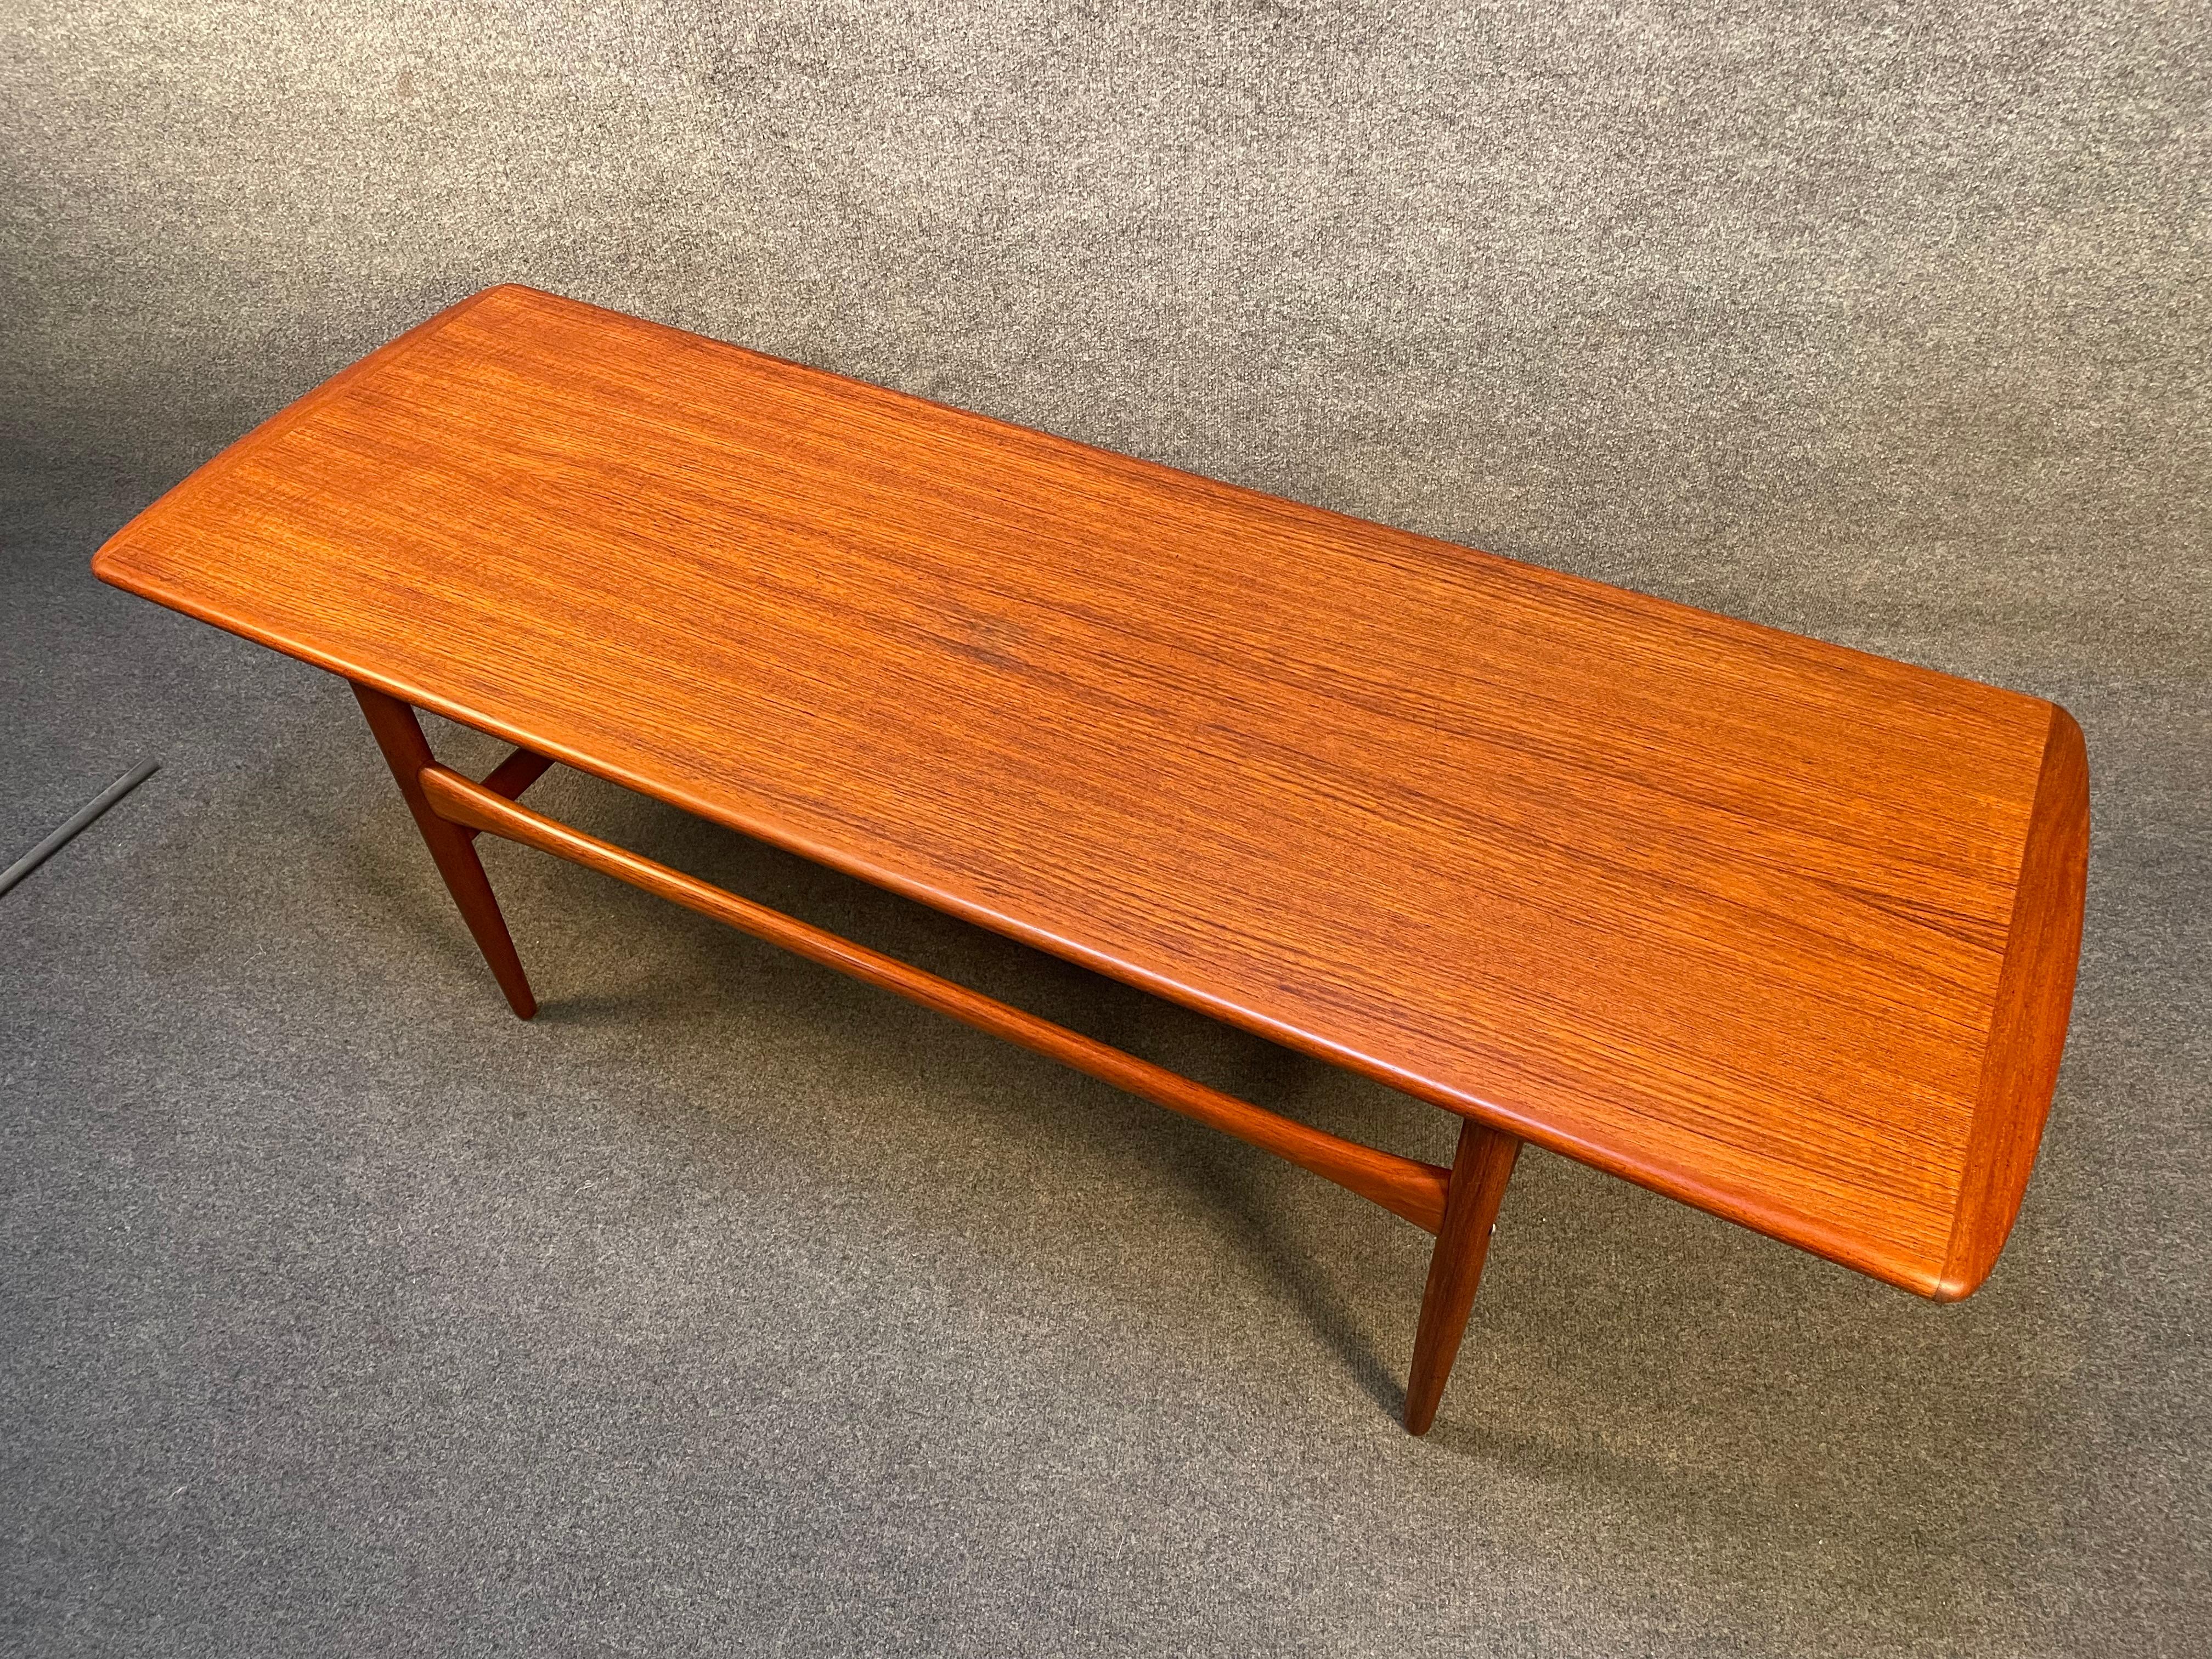 Here is a beautiful Scandinavian Modern teak coffee table manufactured by Arrebro Mobler in Denmark in the 1960s.
This special table, recently imported from Europe to California before its refinishing, features a vibrant wood grain, a sculptural